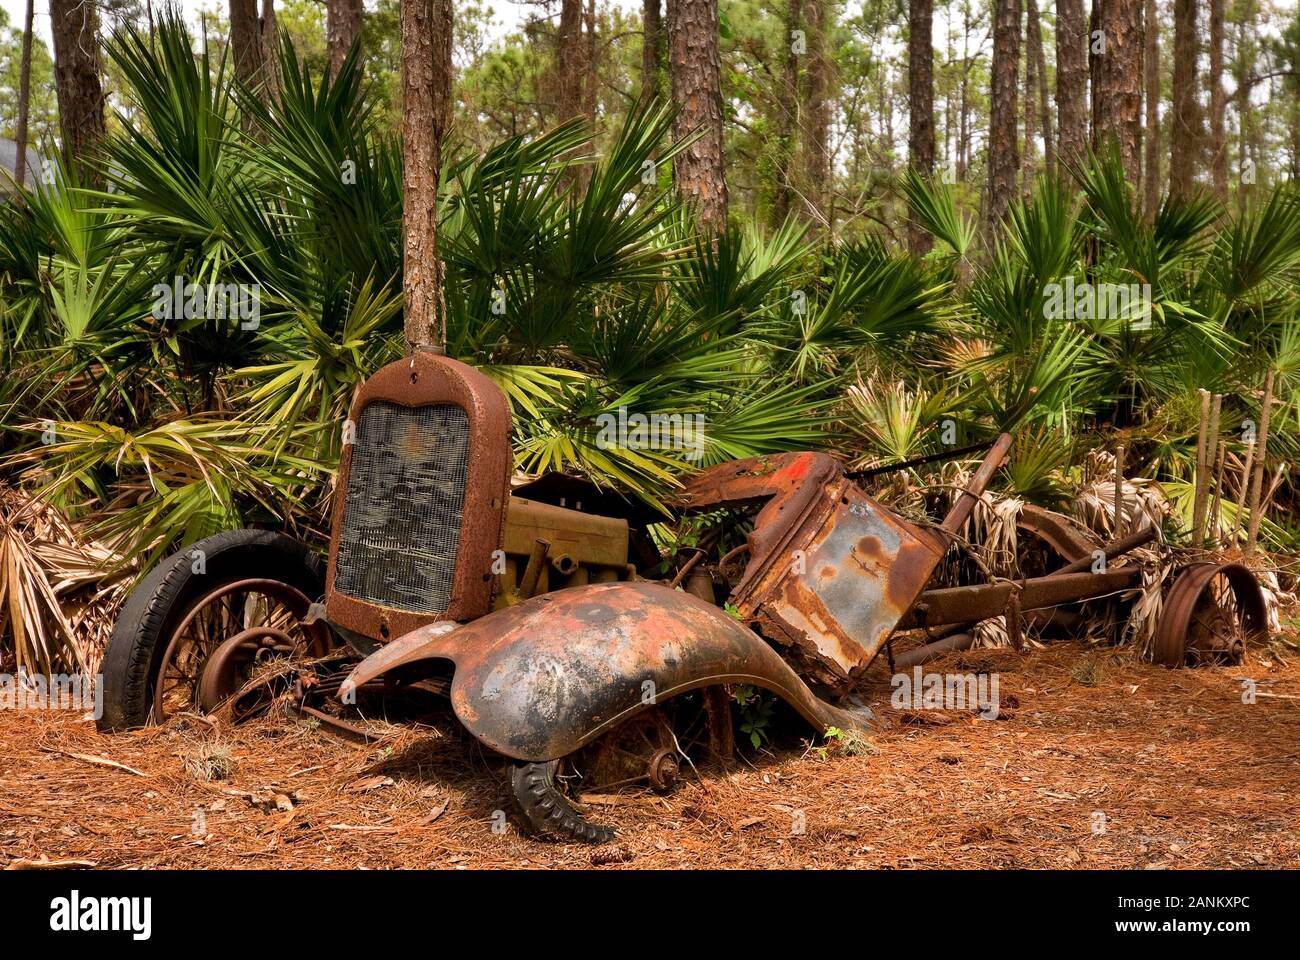 Abandoned old vehicle in a Florida forest Stock Photo